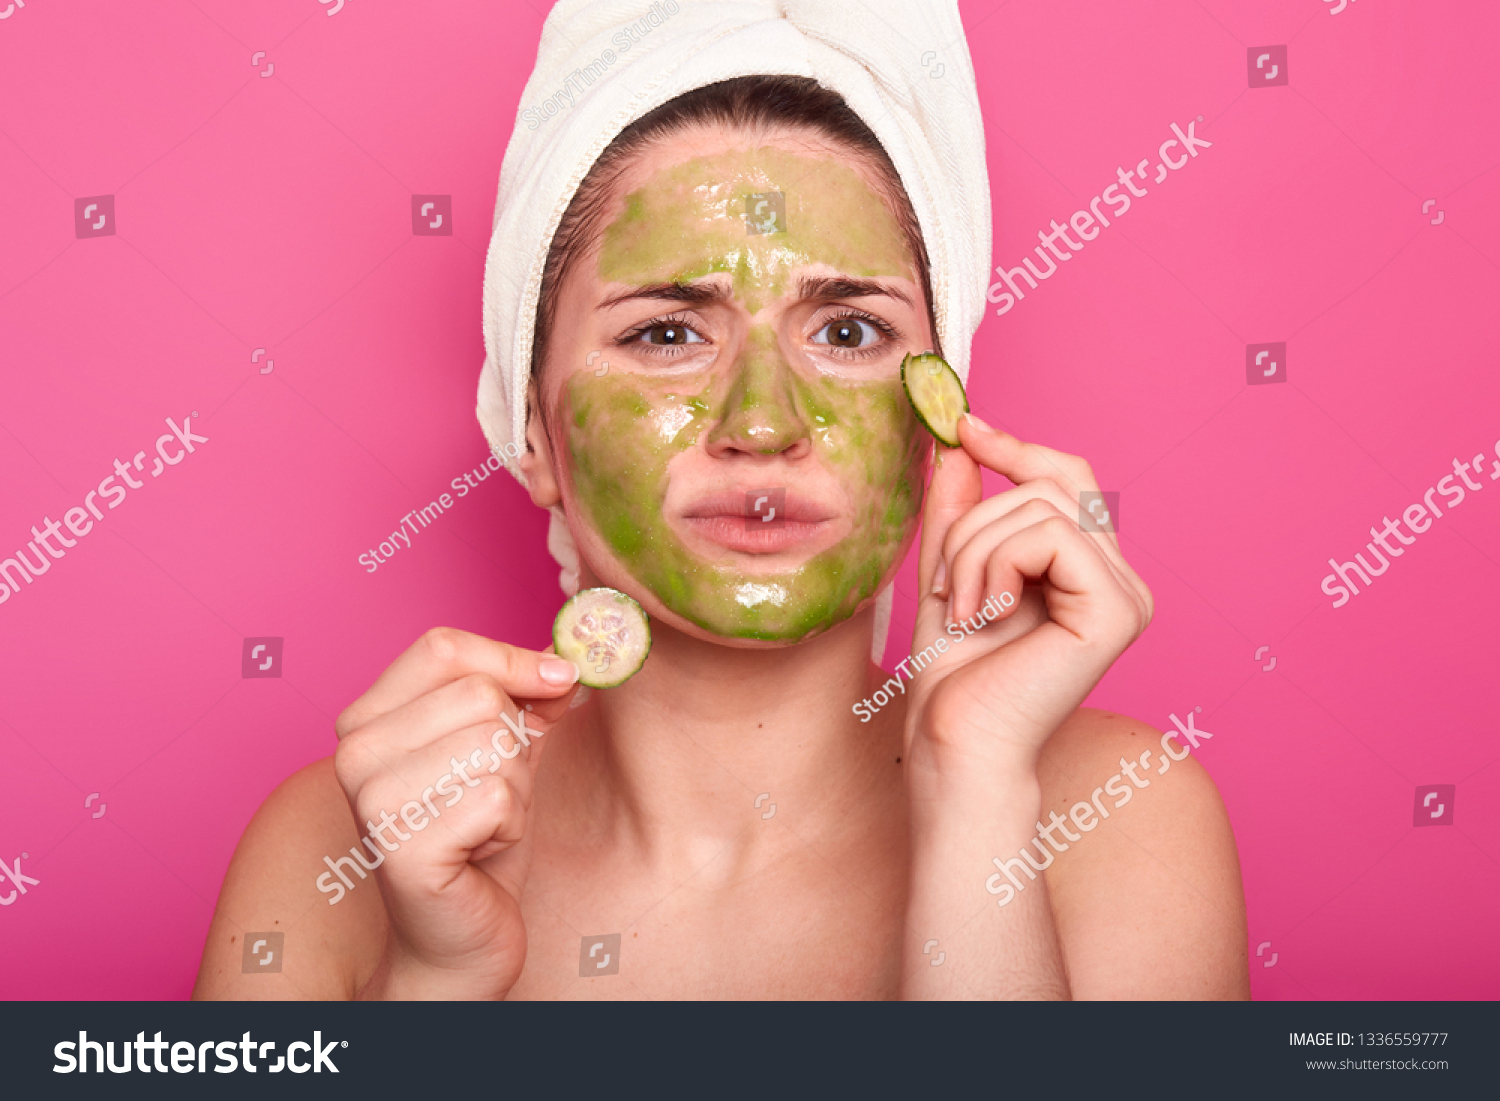 Dissatisfied young cute woman doesnt like smell from beauty mask, discontent with effect, holds two slices of cucmber, removes wrinkles on face, wears white towel, isolated on pink studio wall #1336559777